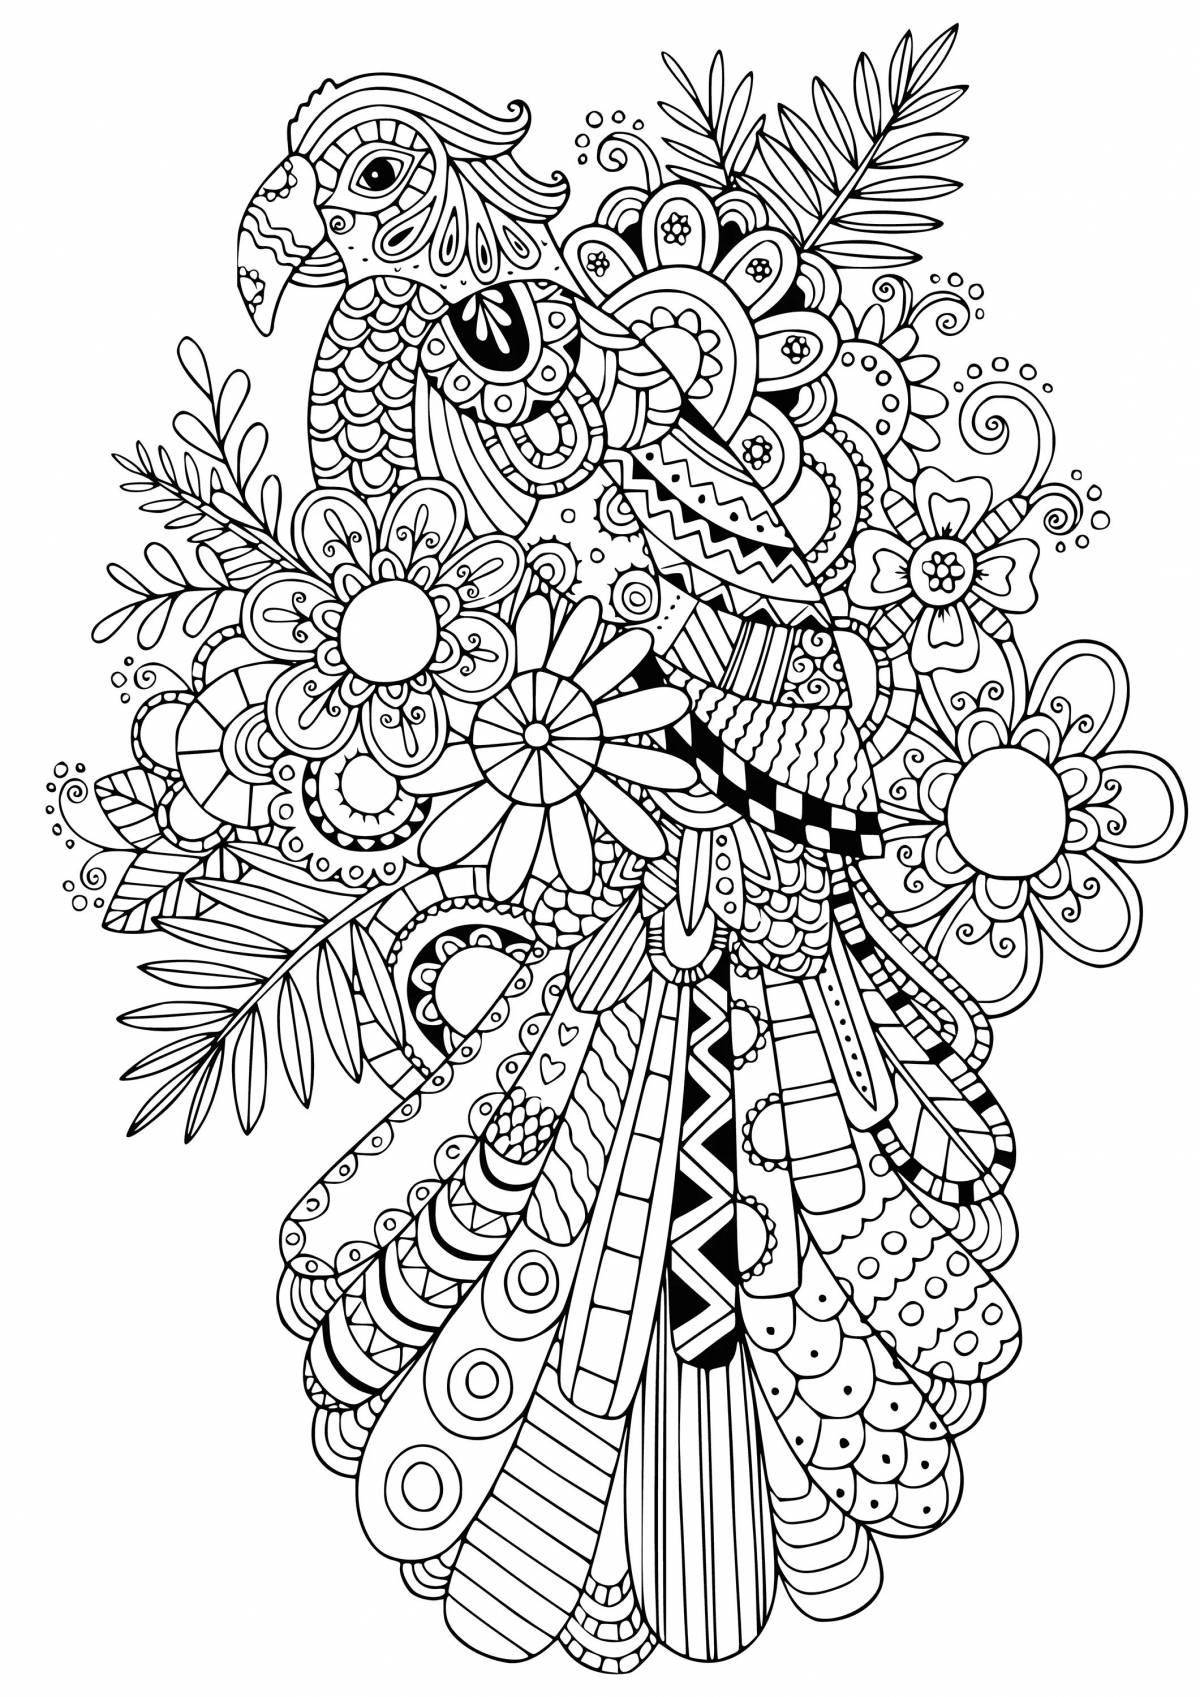 Relaxing anti-stress coloring book for kids